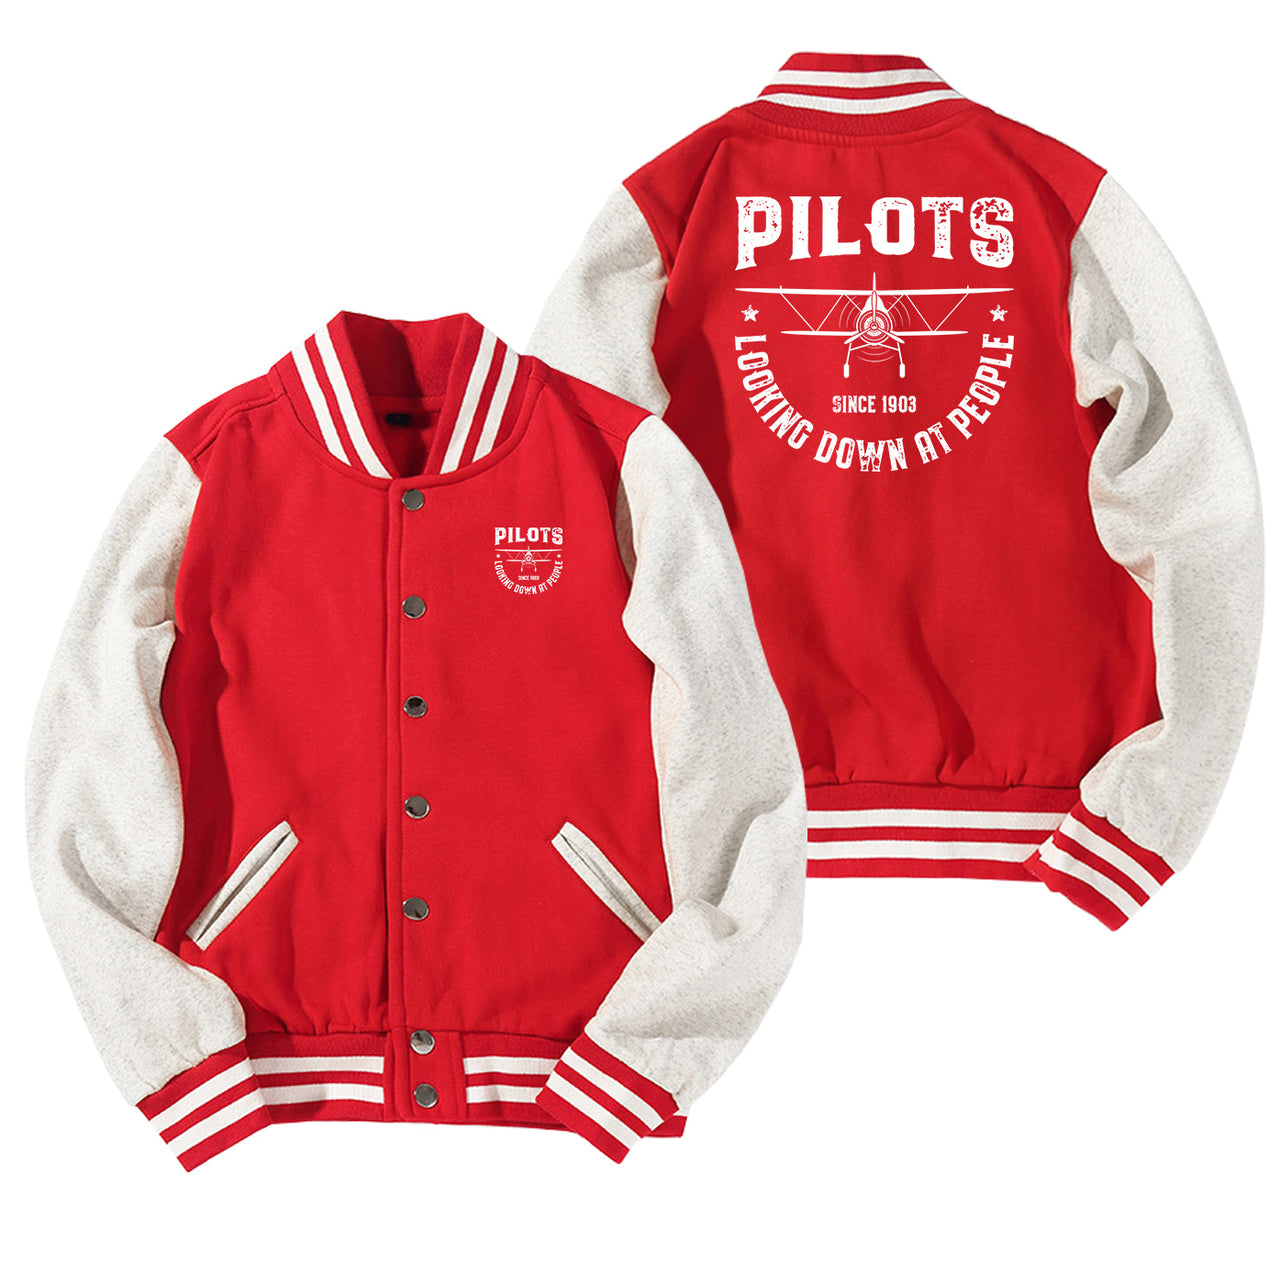 Pilots Looking Down at People Since 1903 Designed Baseball Style Jackets